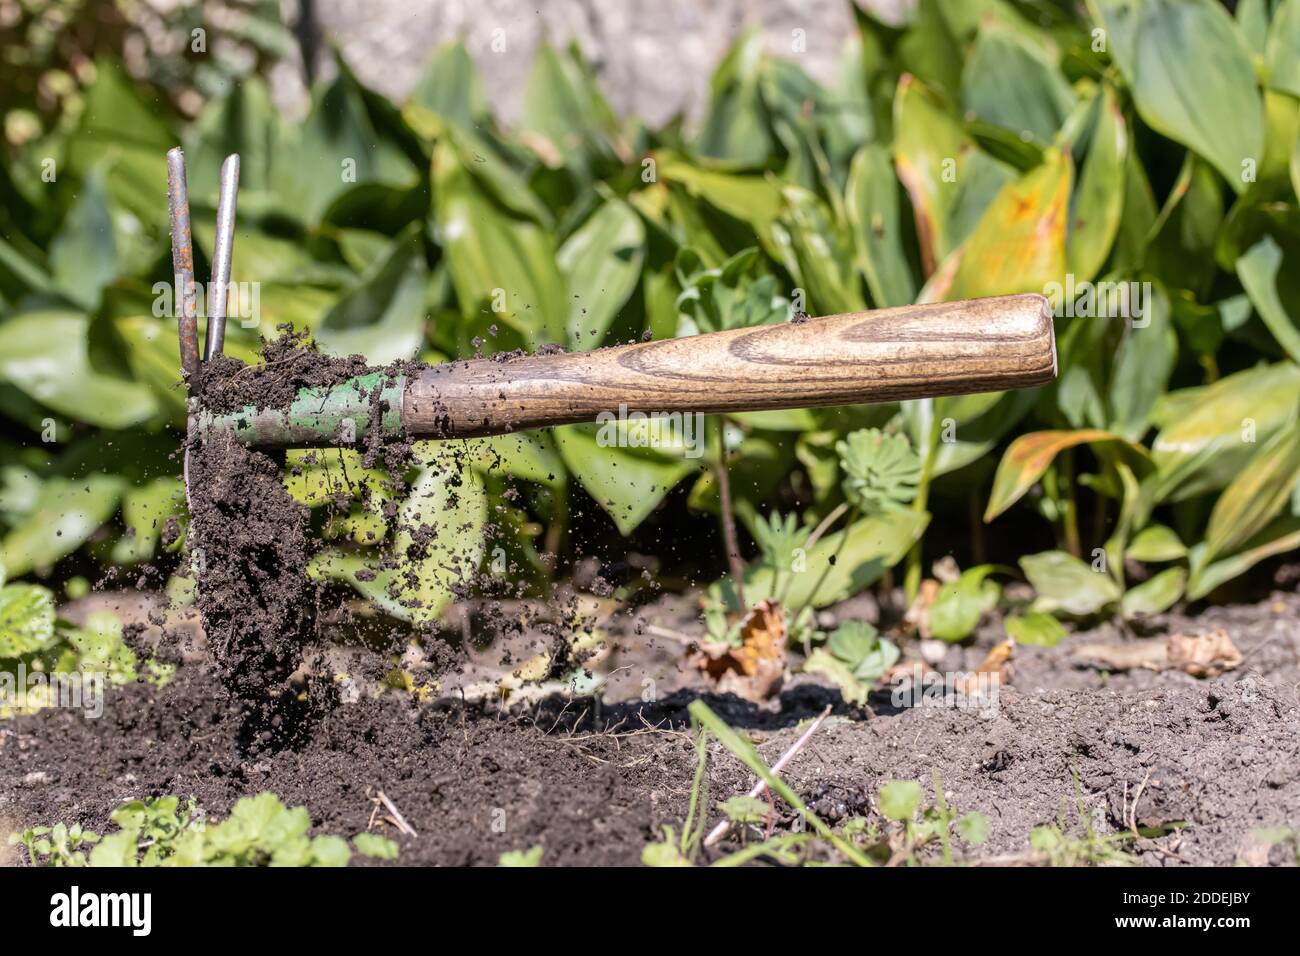 A hoe digs clay in the garden. The hoe works on a flower-bed with flying soil from digging. Stock Photo